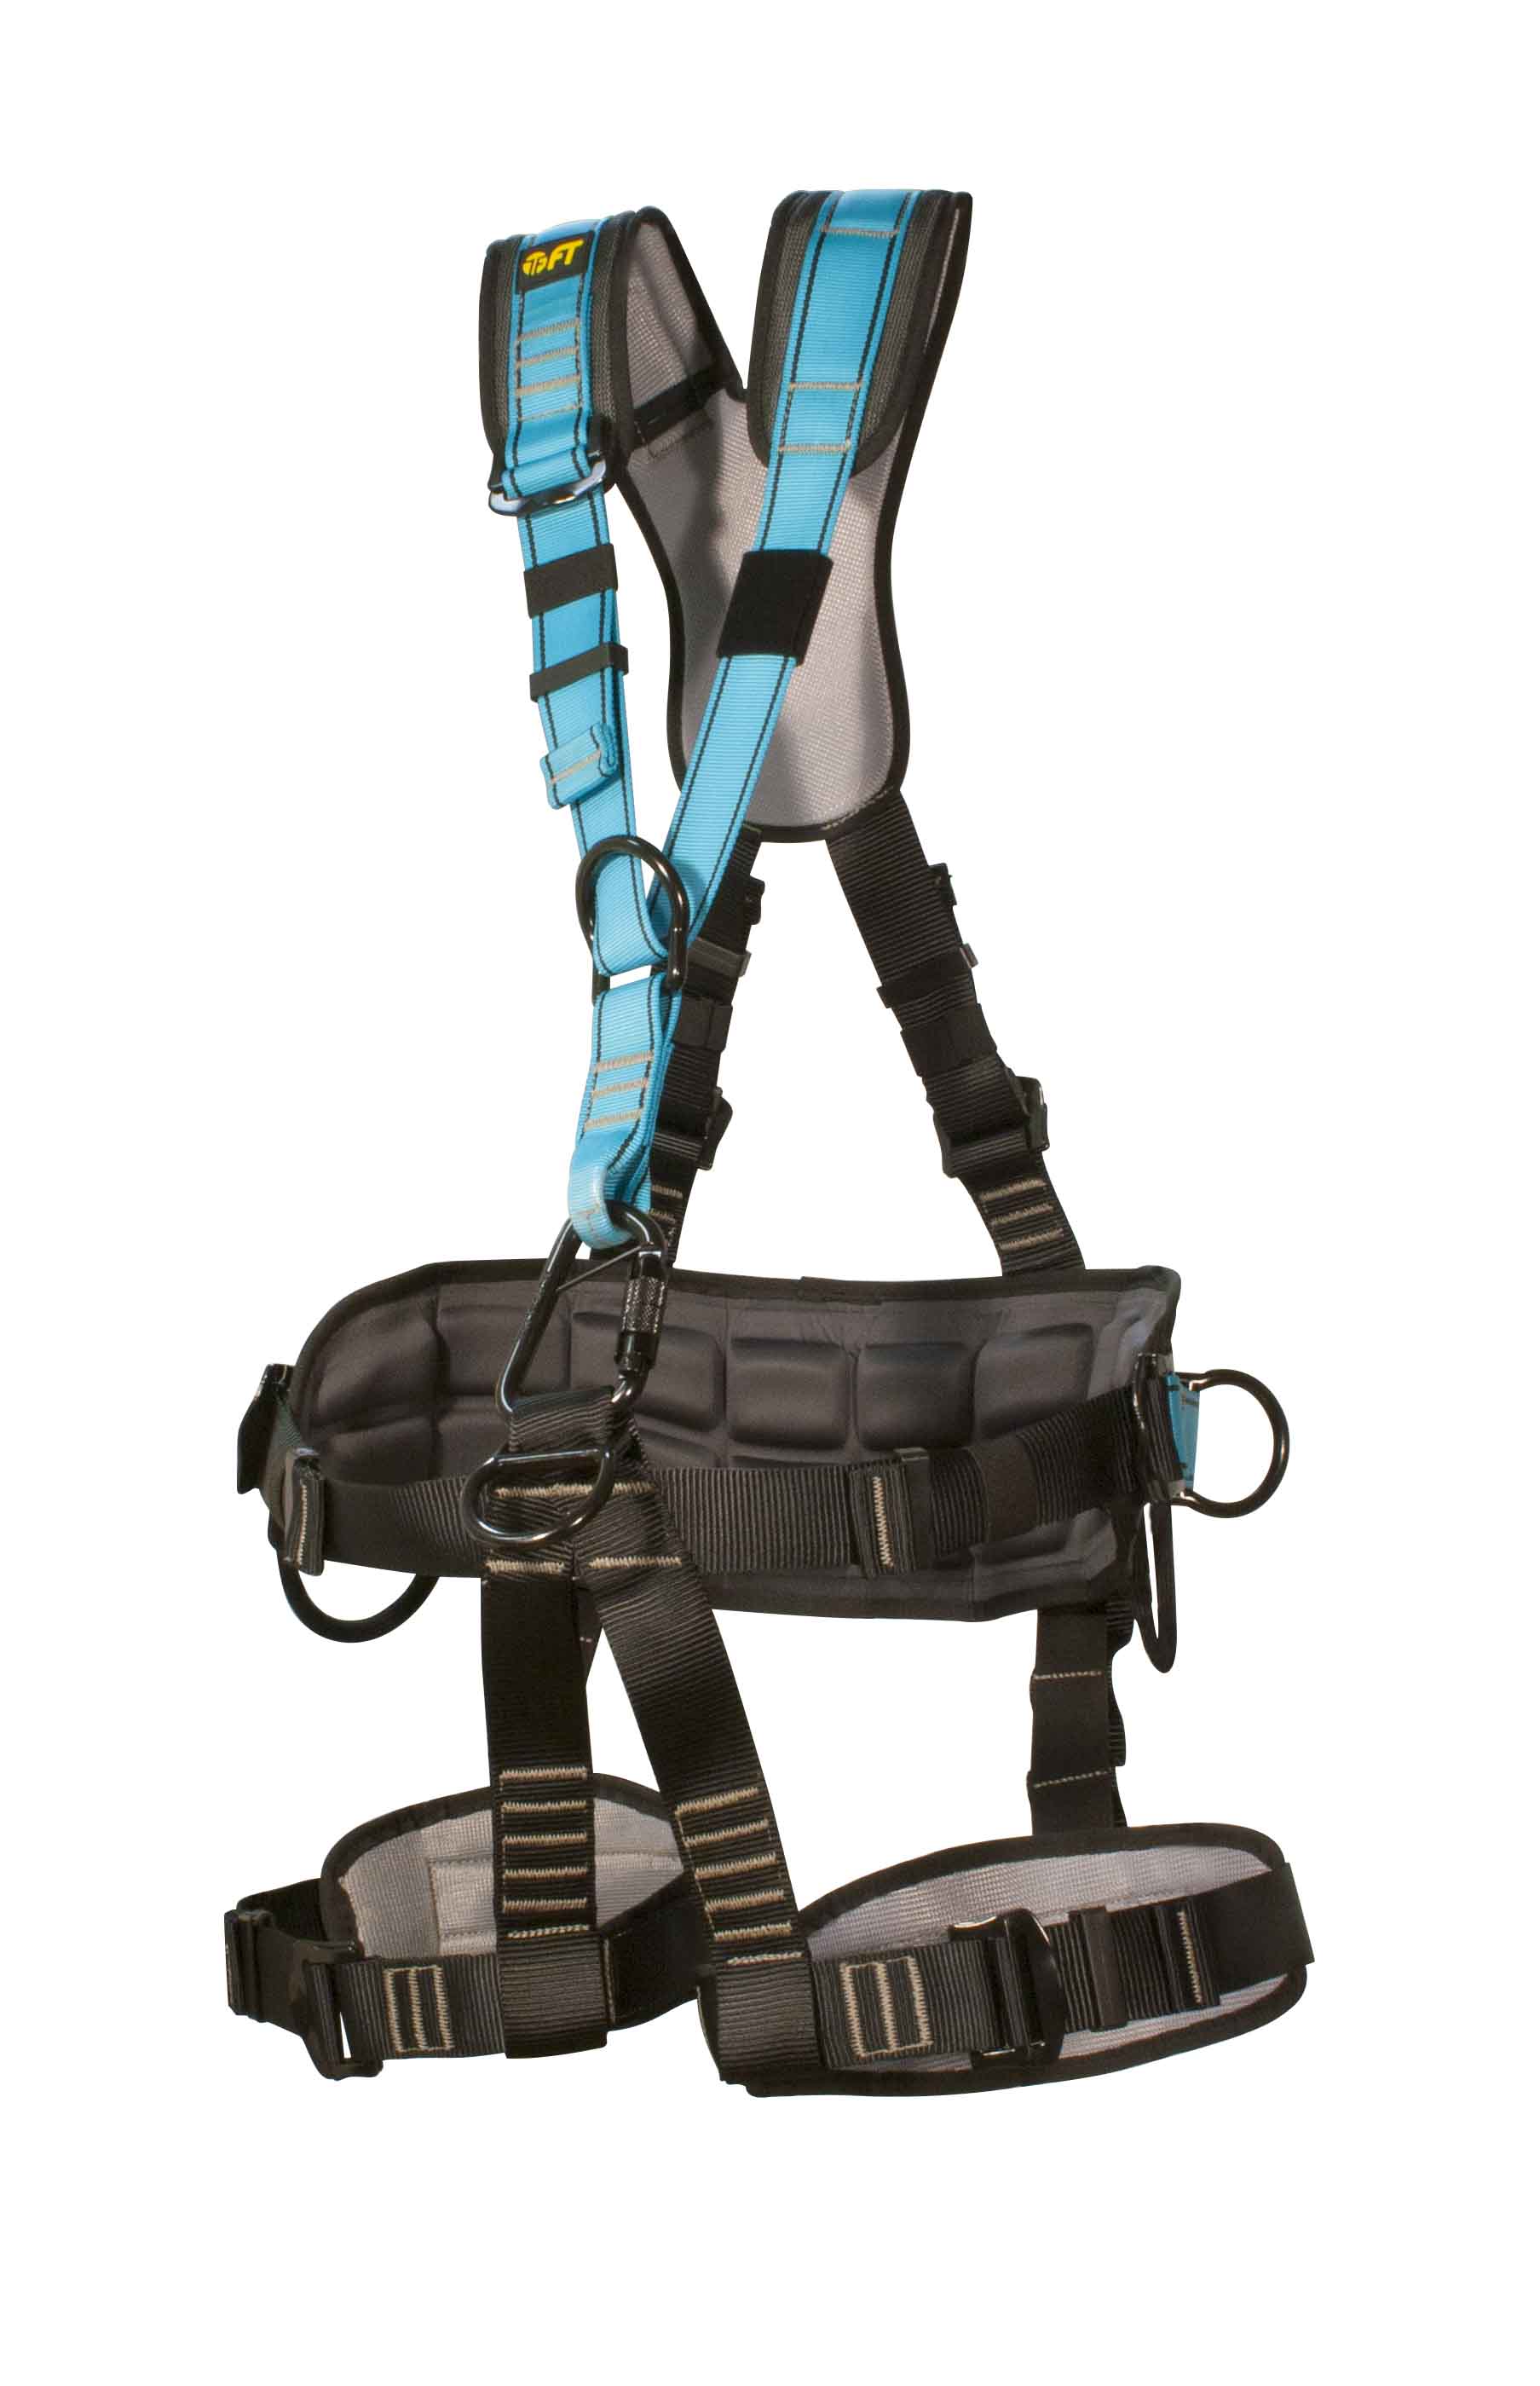 SAFETY HARNESS “CONDOR”